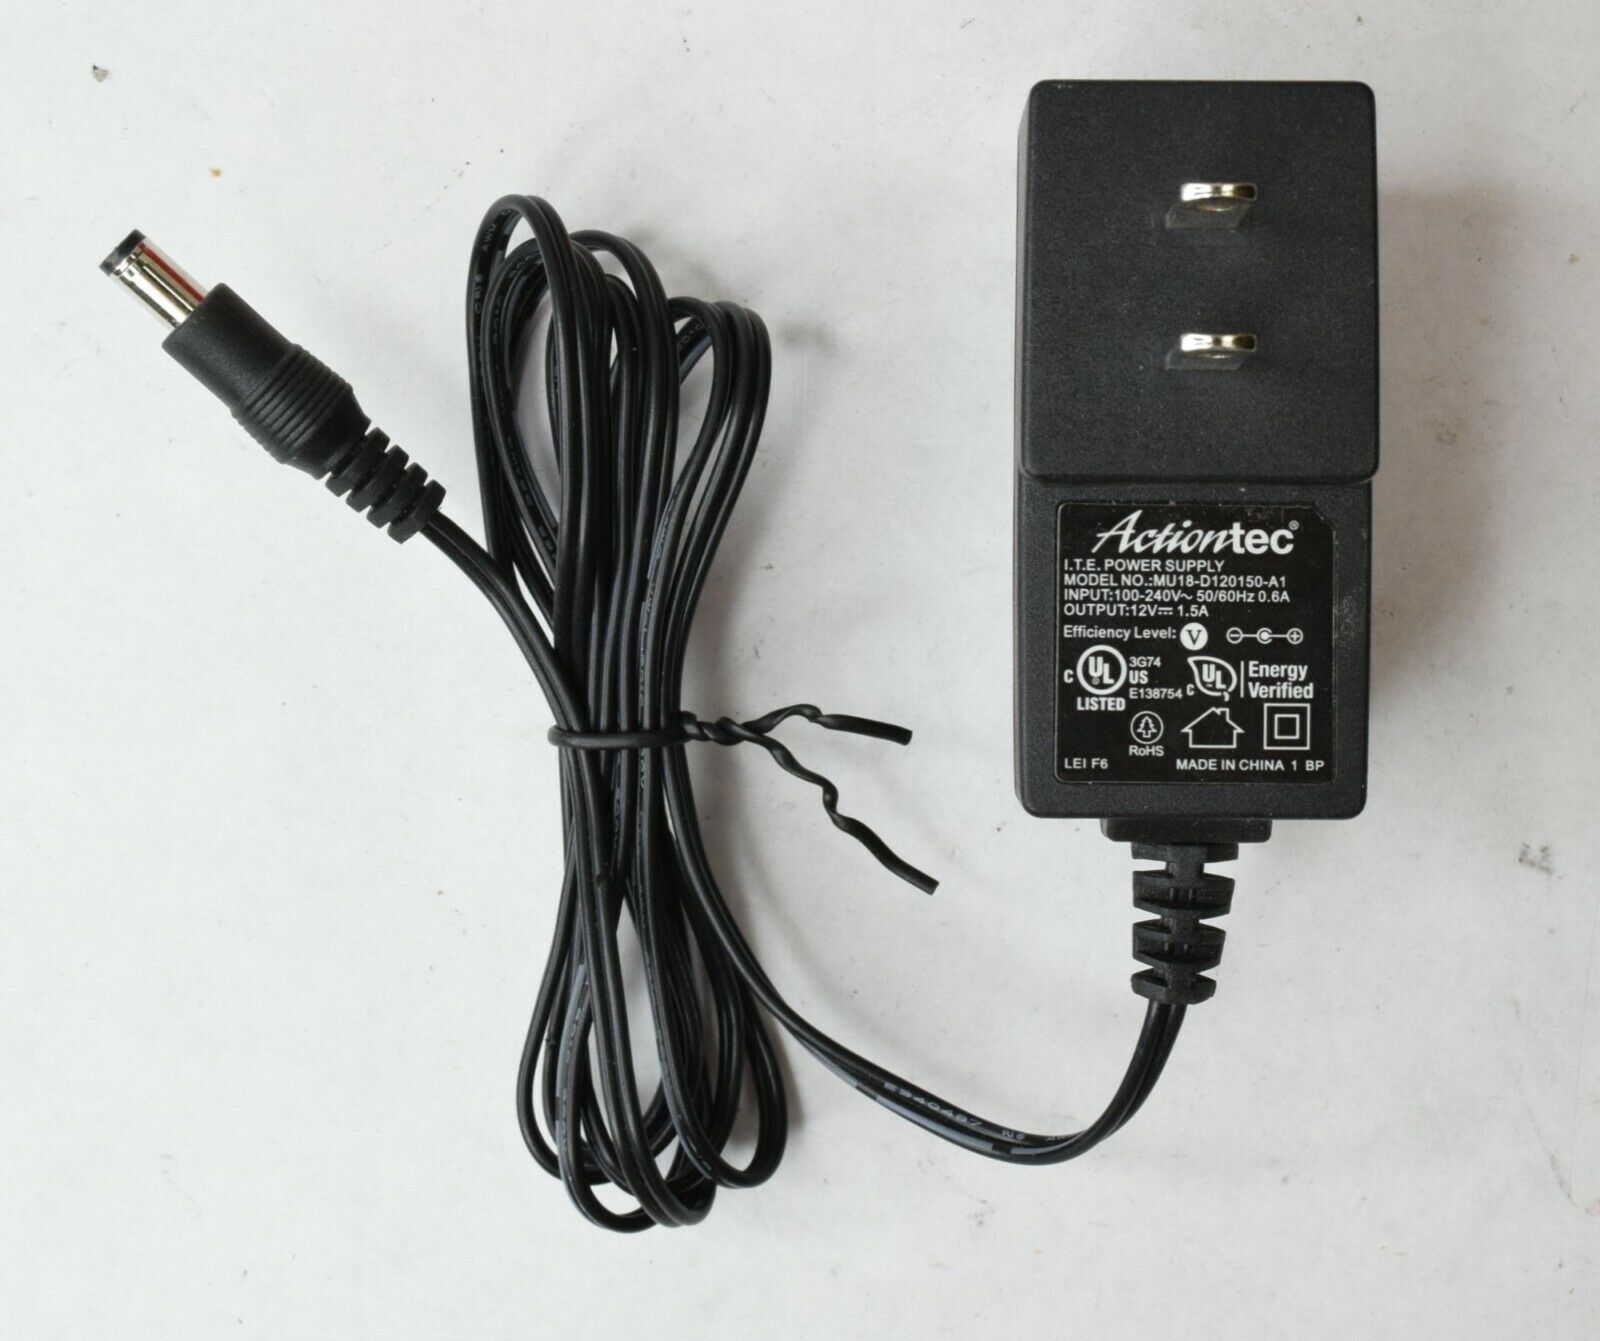 Actiontec I.T.E. Power Supply Adapter Unit MU18-D120150-A1 12V 1.5A Type: Adapter Output Voltage: 12 V MPN: MU18-D1201